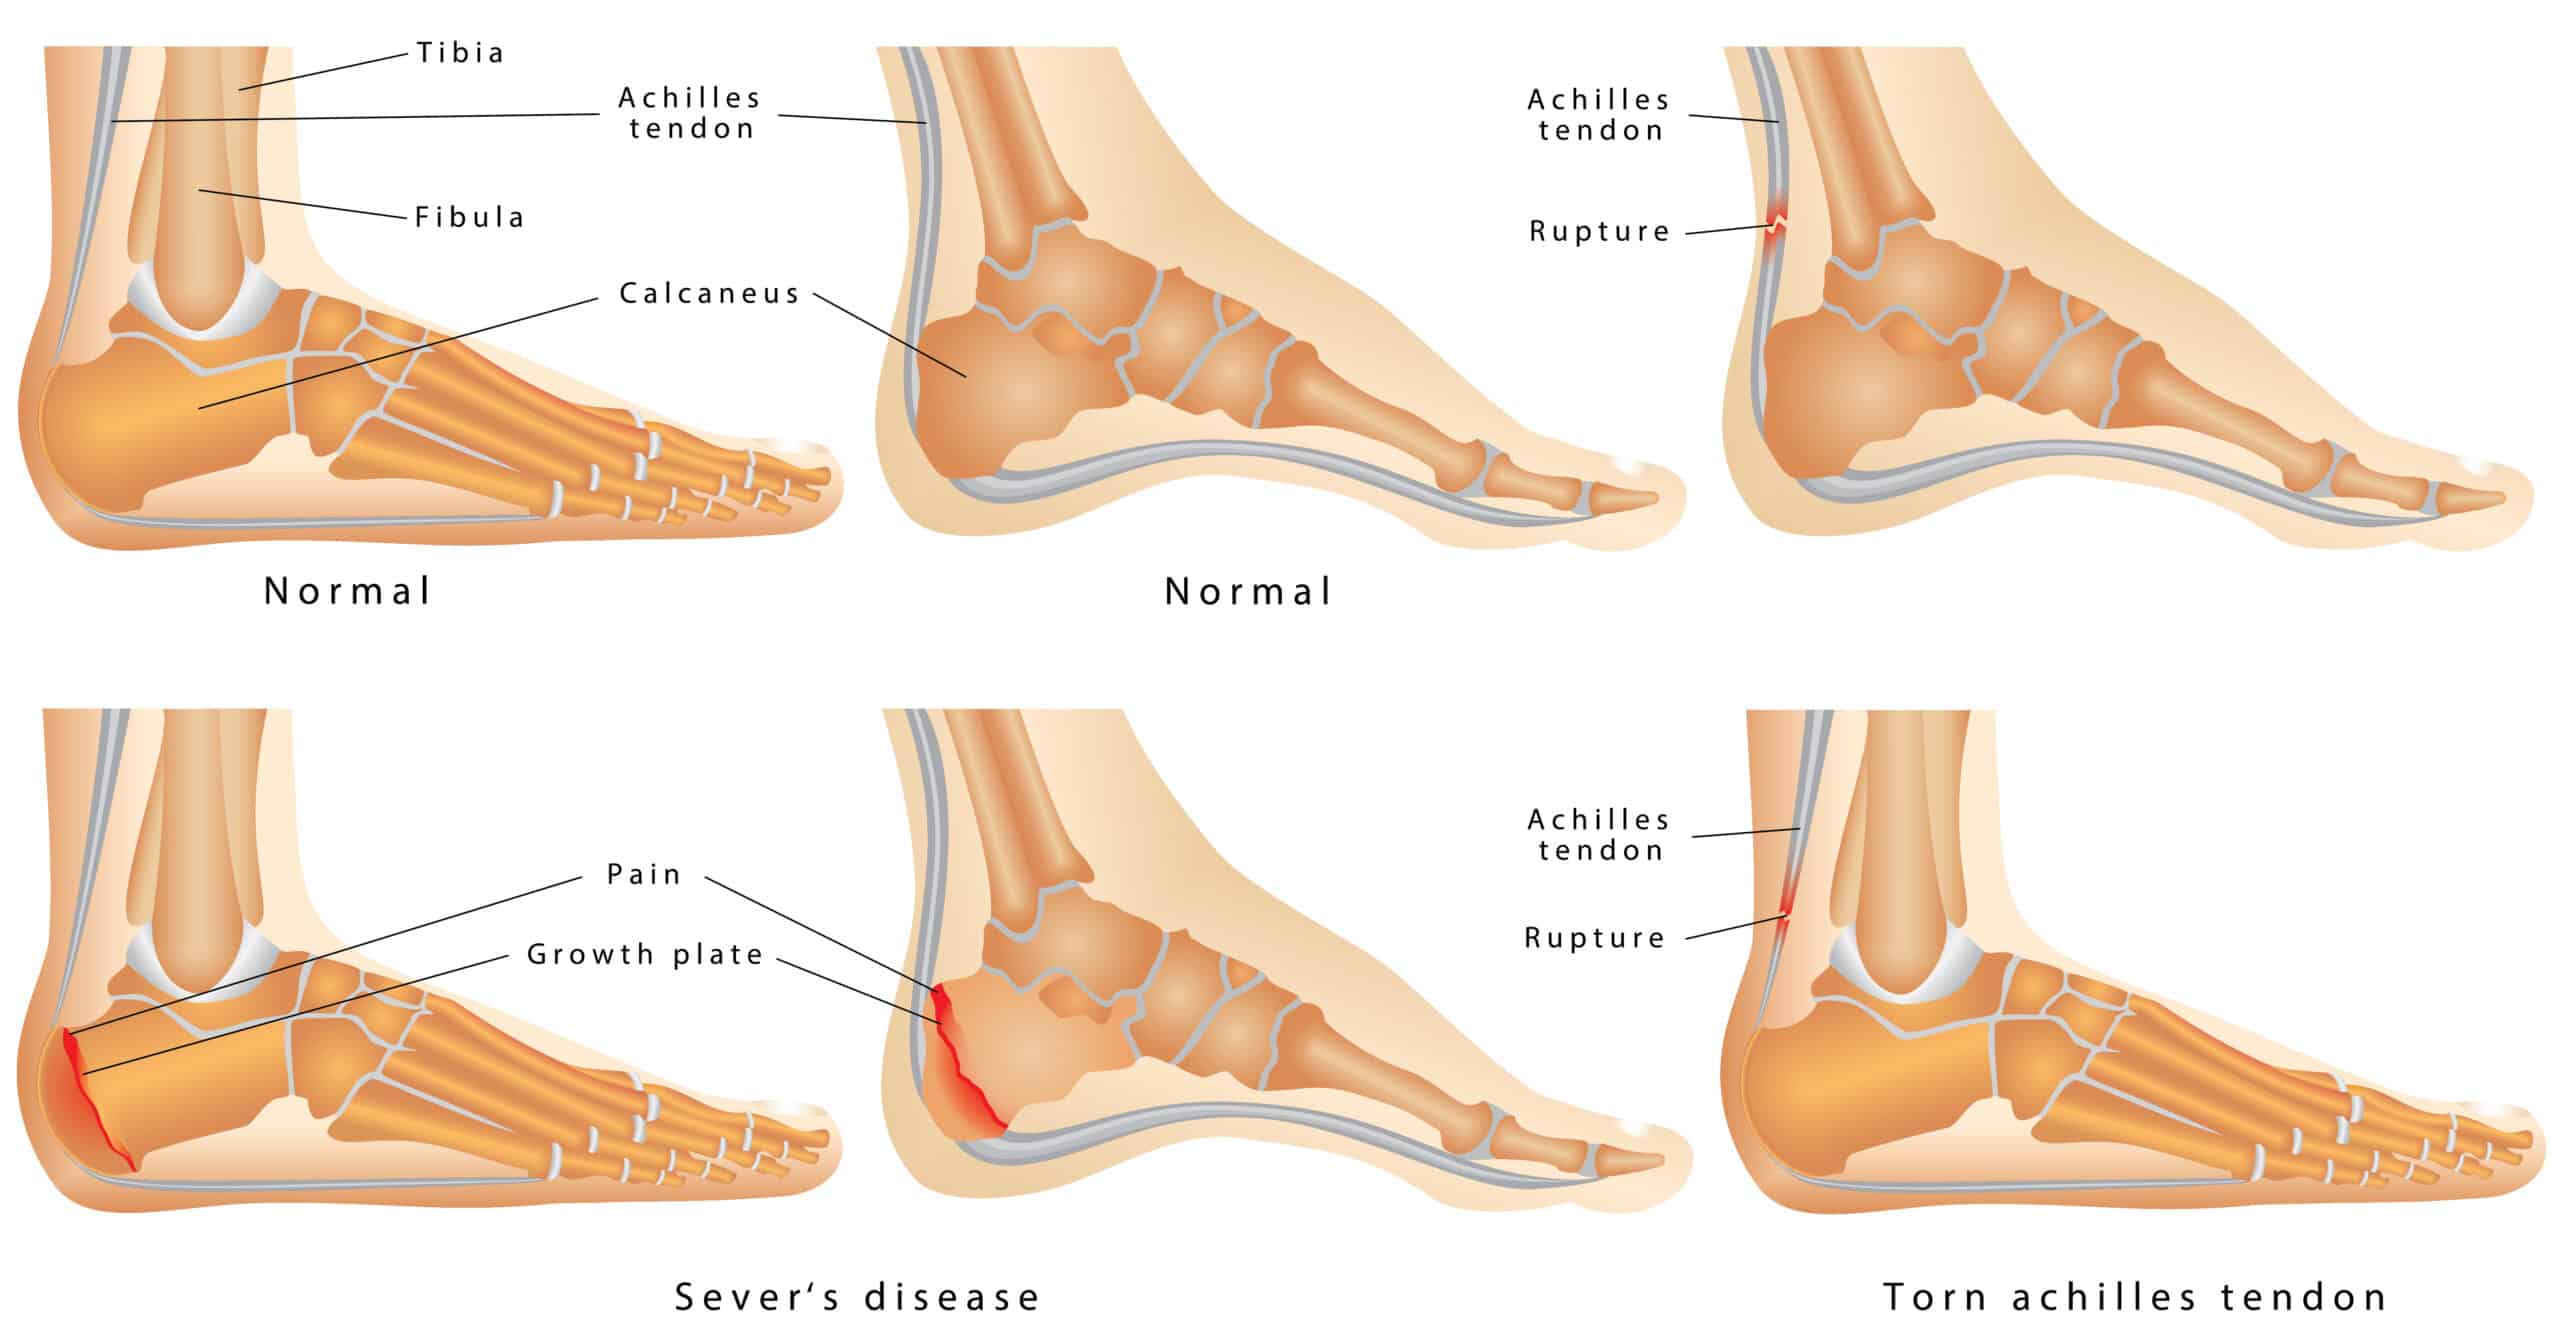 Calcaneus: What It Is, Location, Injuries, and More | Osmosis